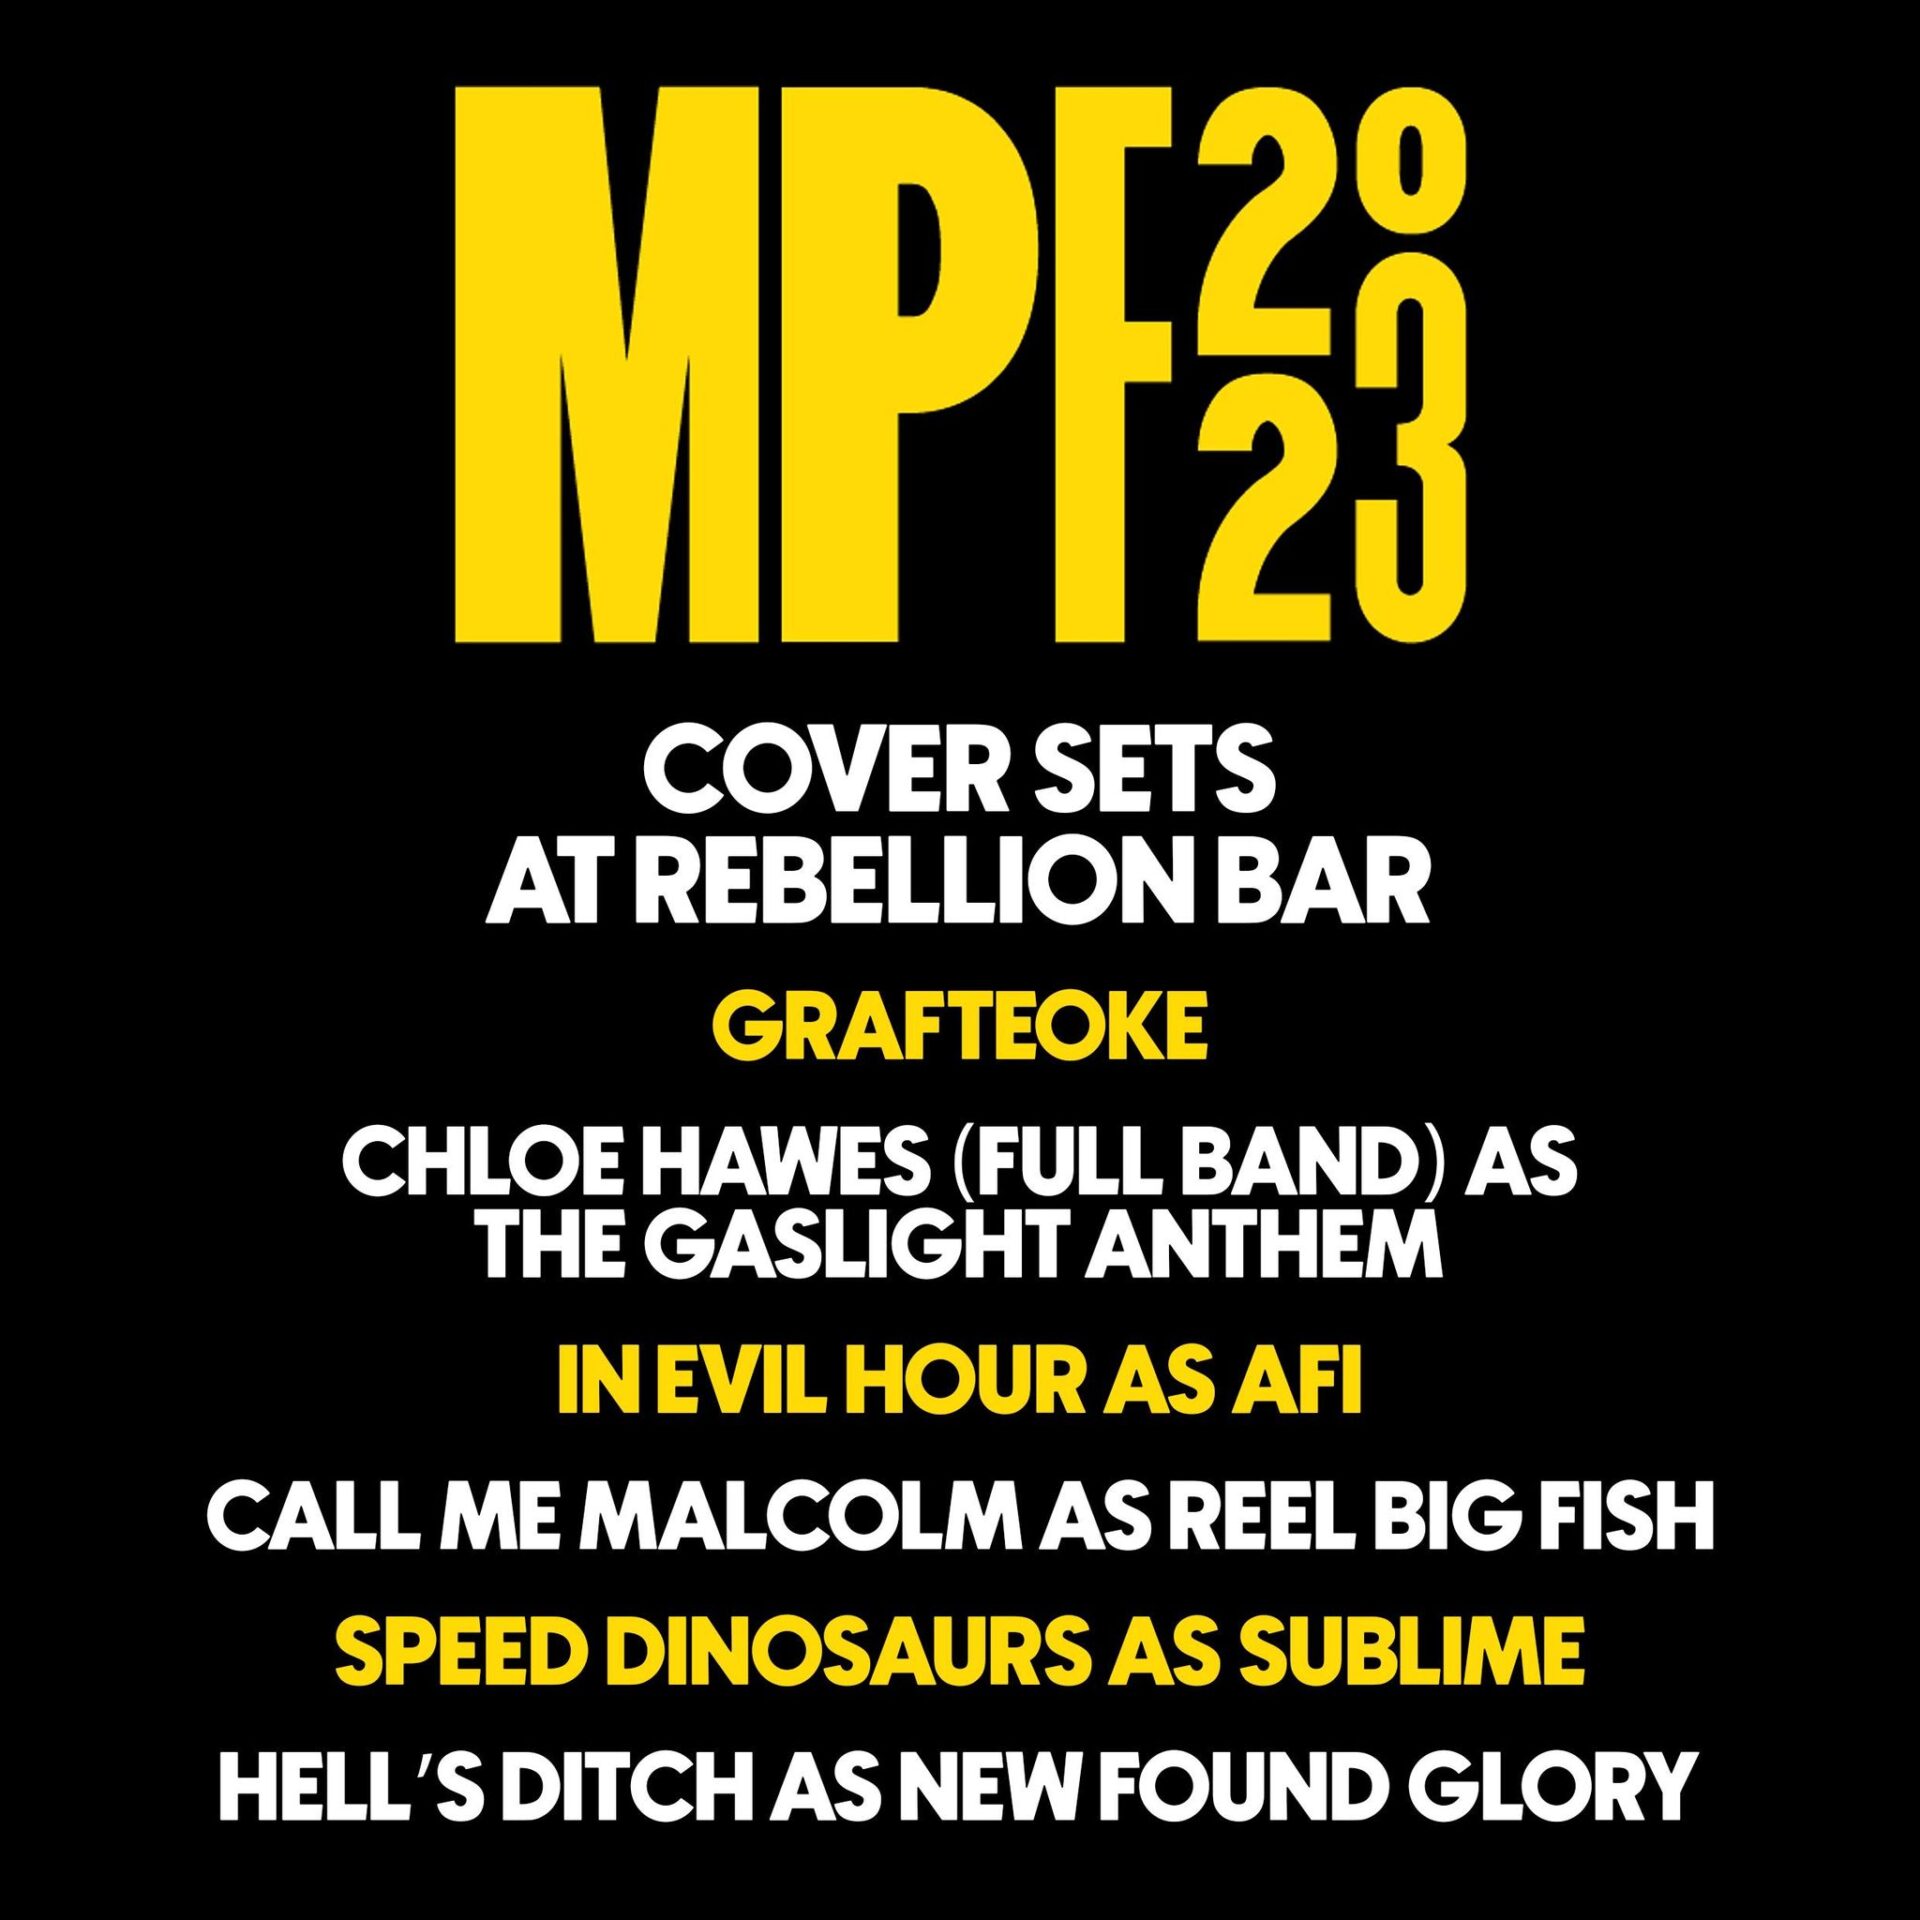 MPF2023: THE COVER BANDS - Manchester Punk Festival